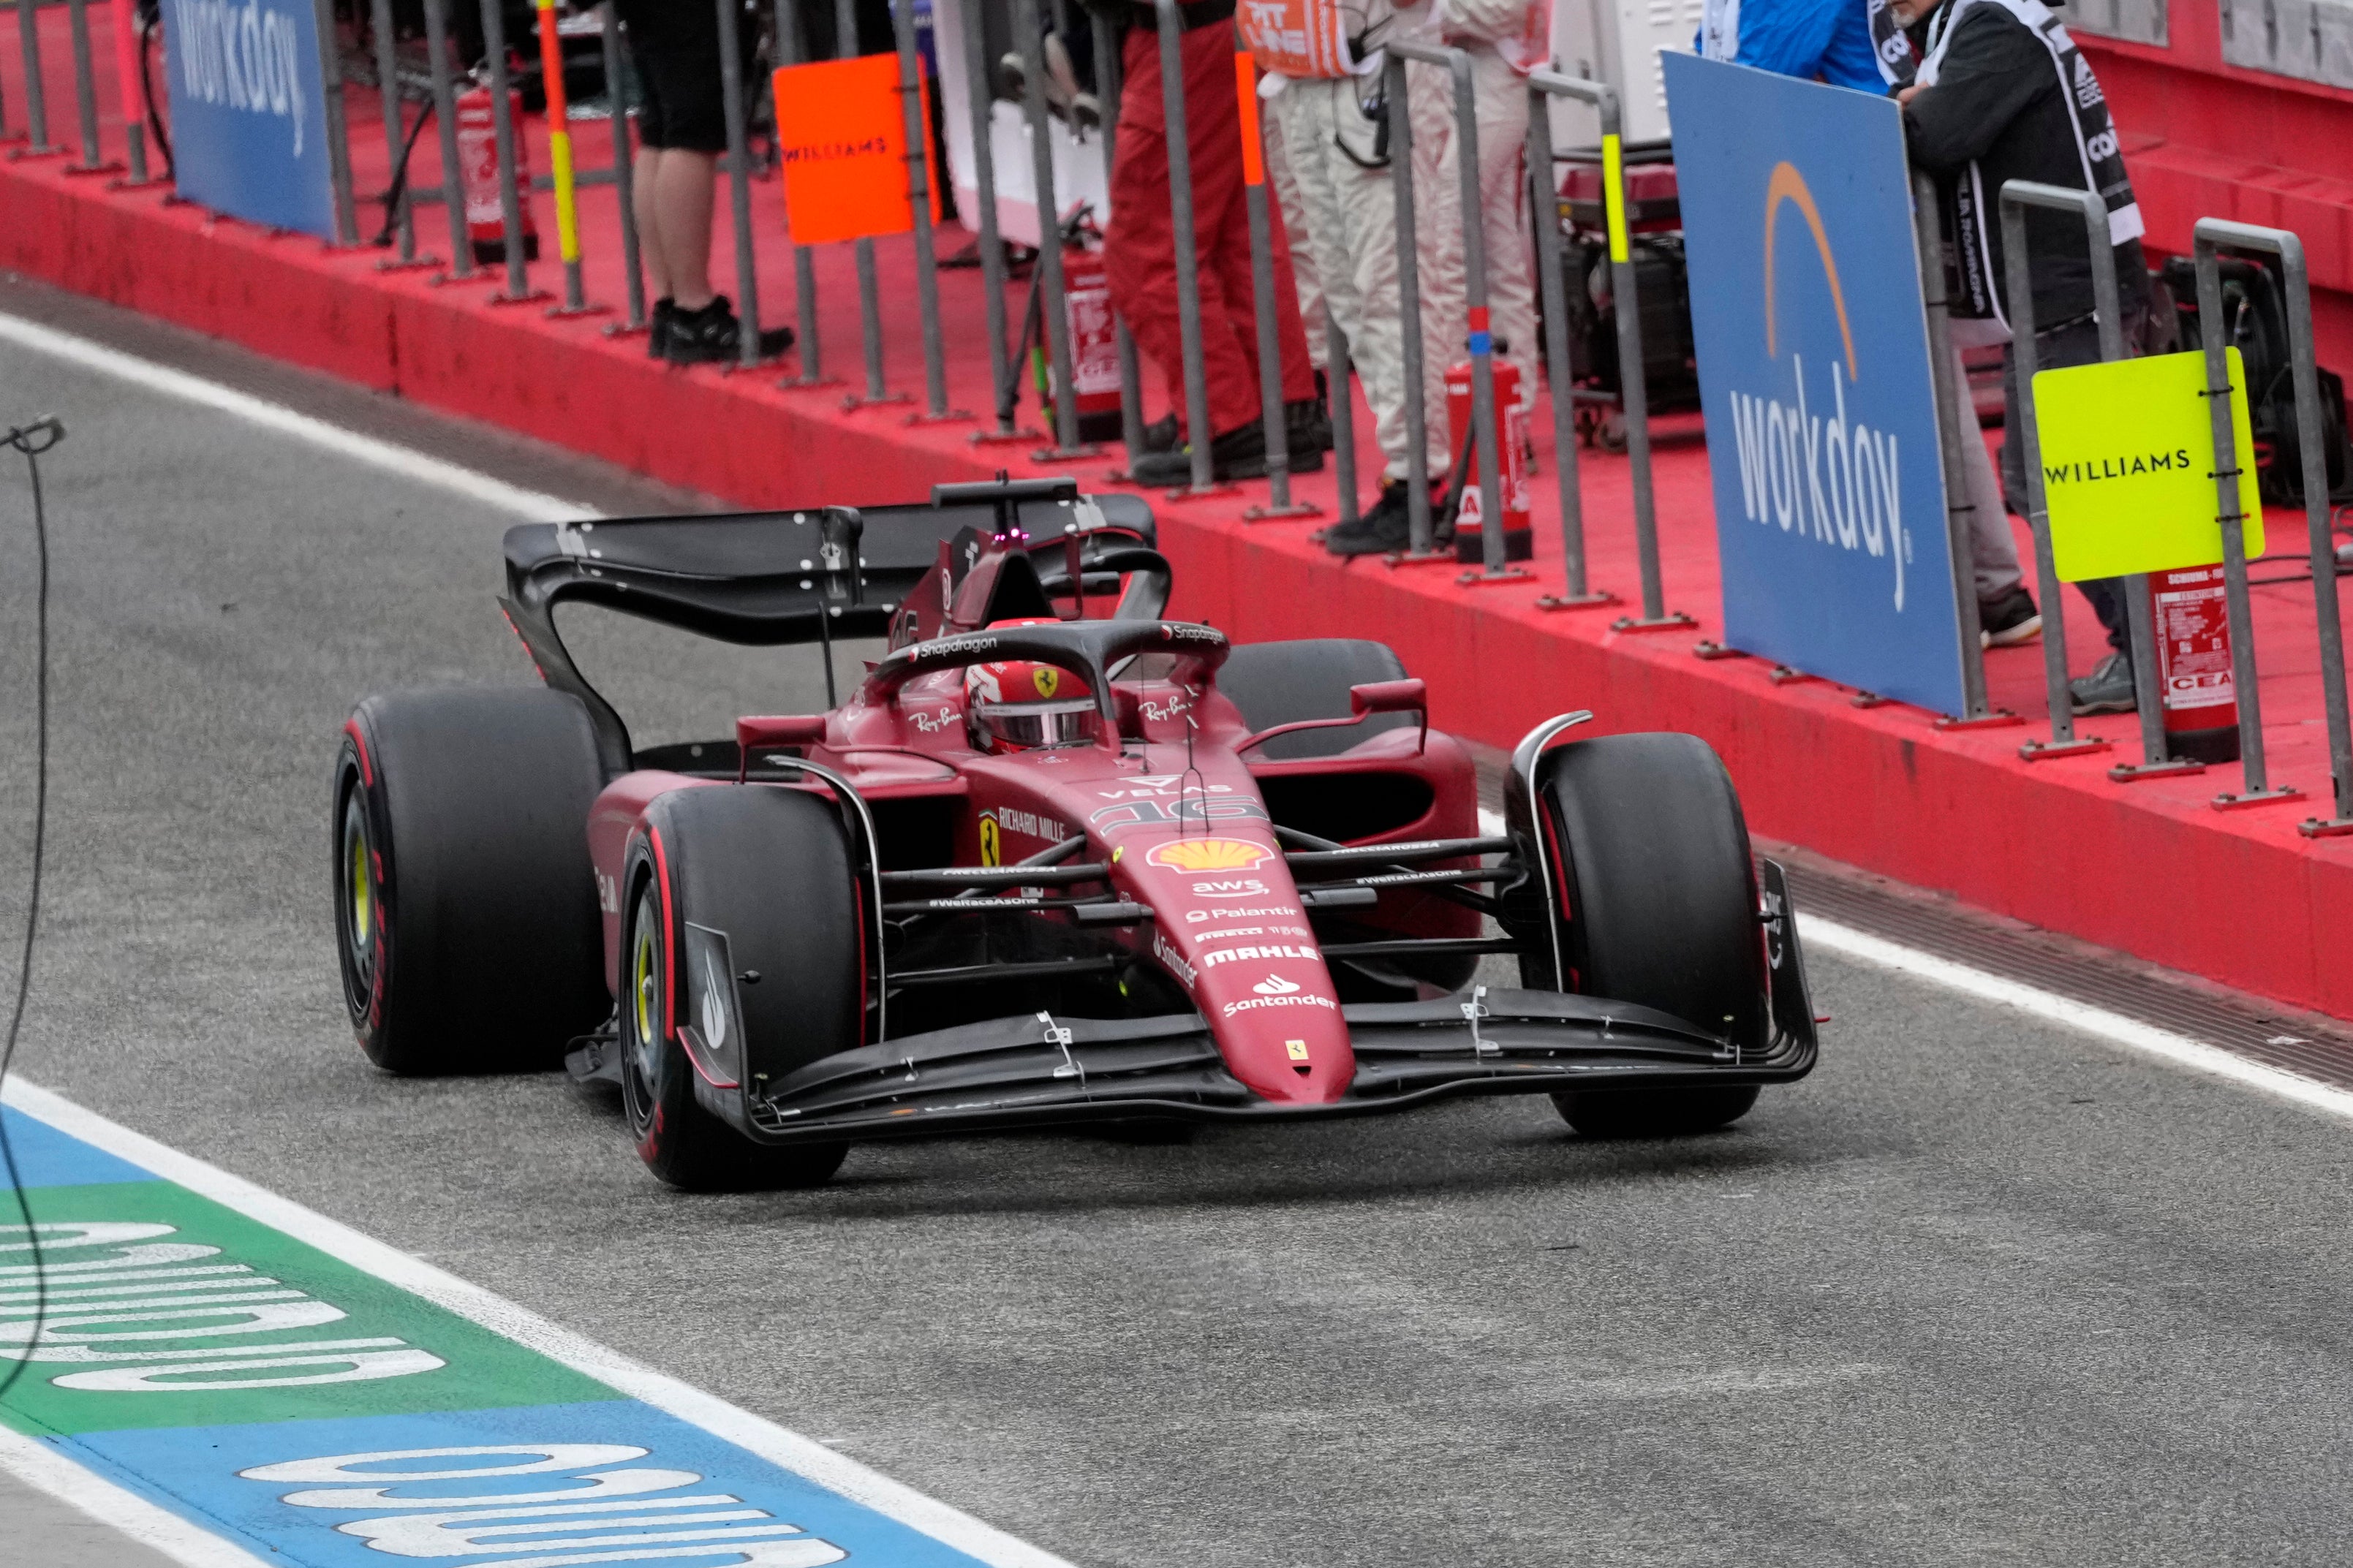 Charles Leclerc finished fastest in first practice (Luca Bruno/AP)